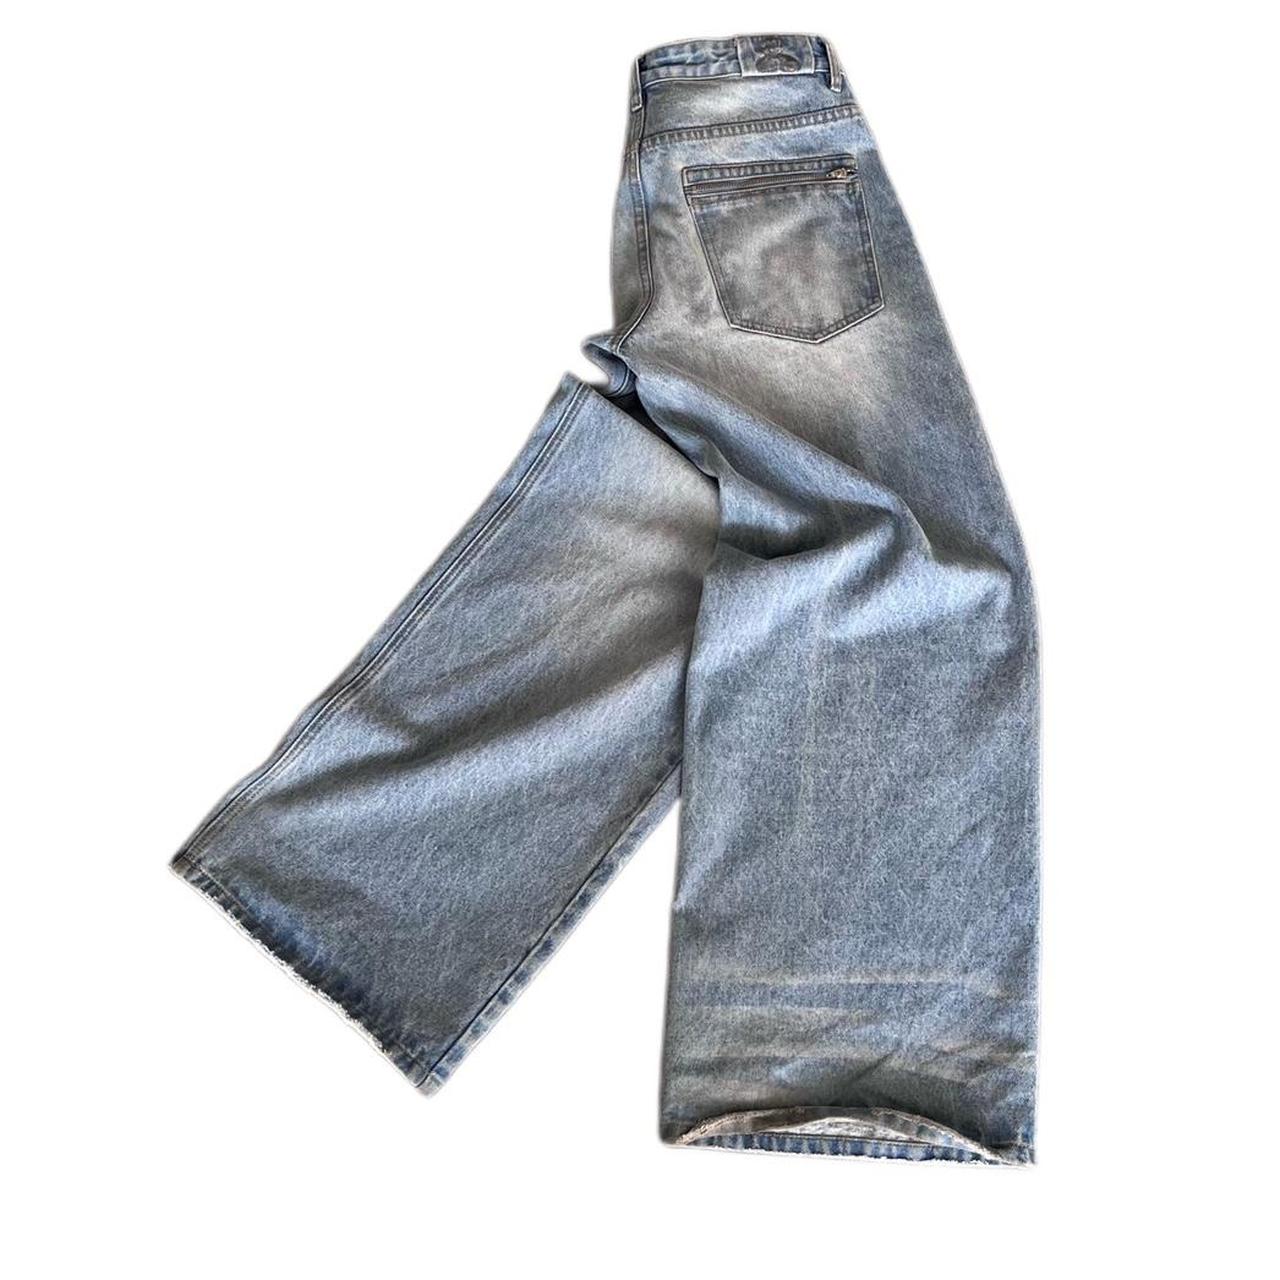 Baggy Light wash pants Only 75 pairs made 30x32 -... - Depop